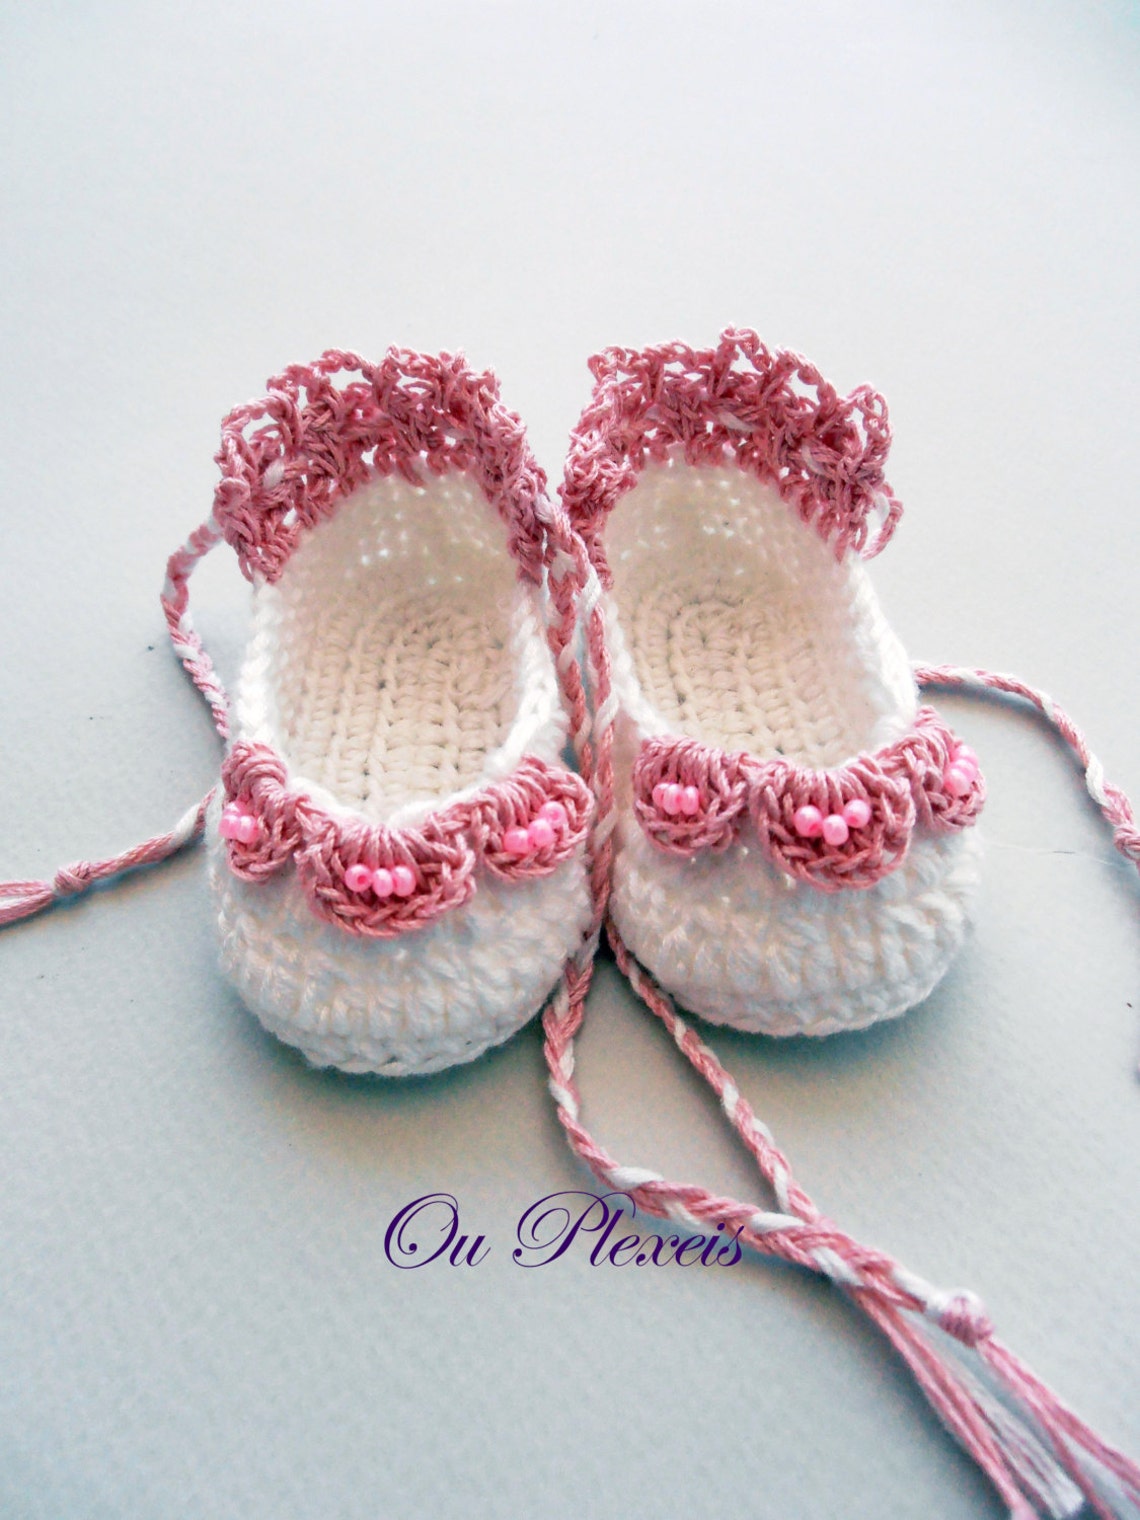 Crochet Baby Girl Shoes Crochet Mary Janes Shoes Pregnancy | Etsy